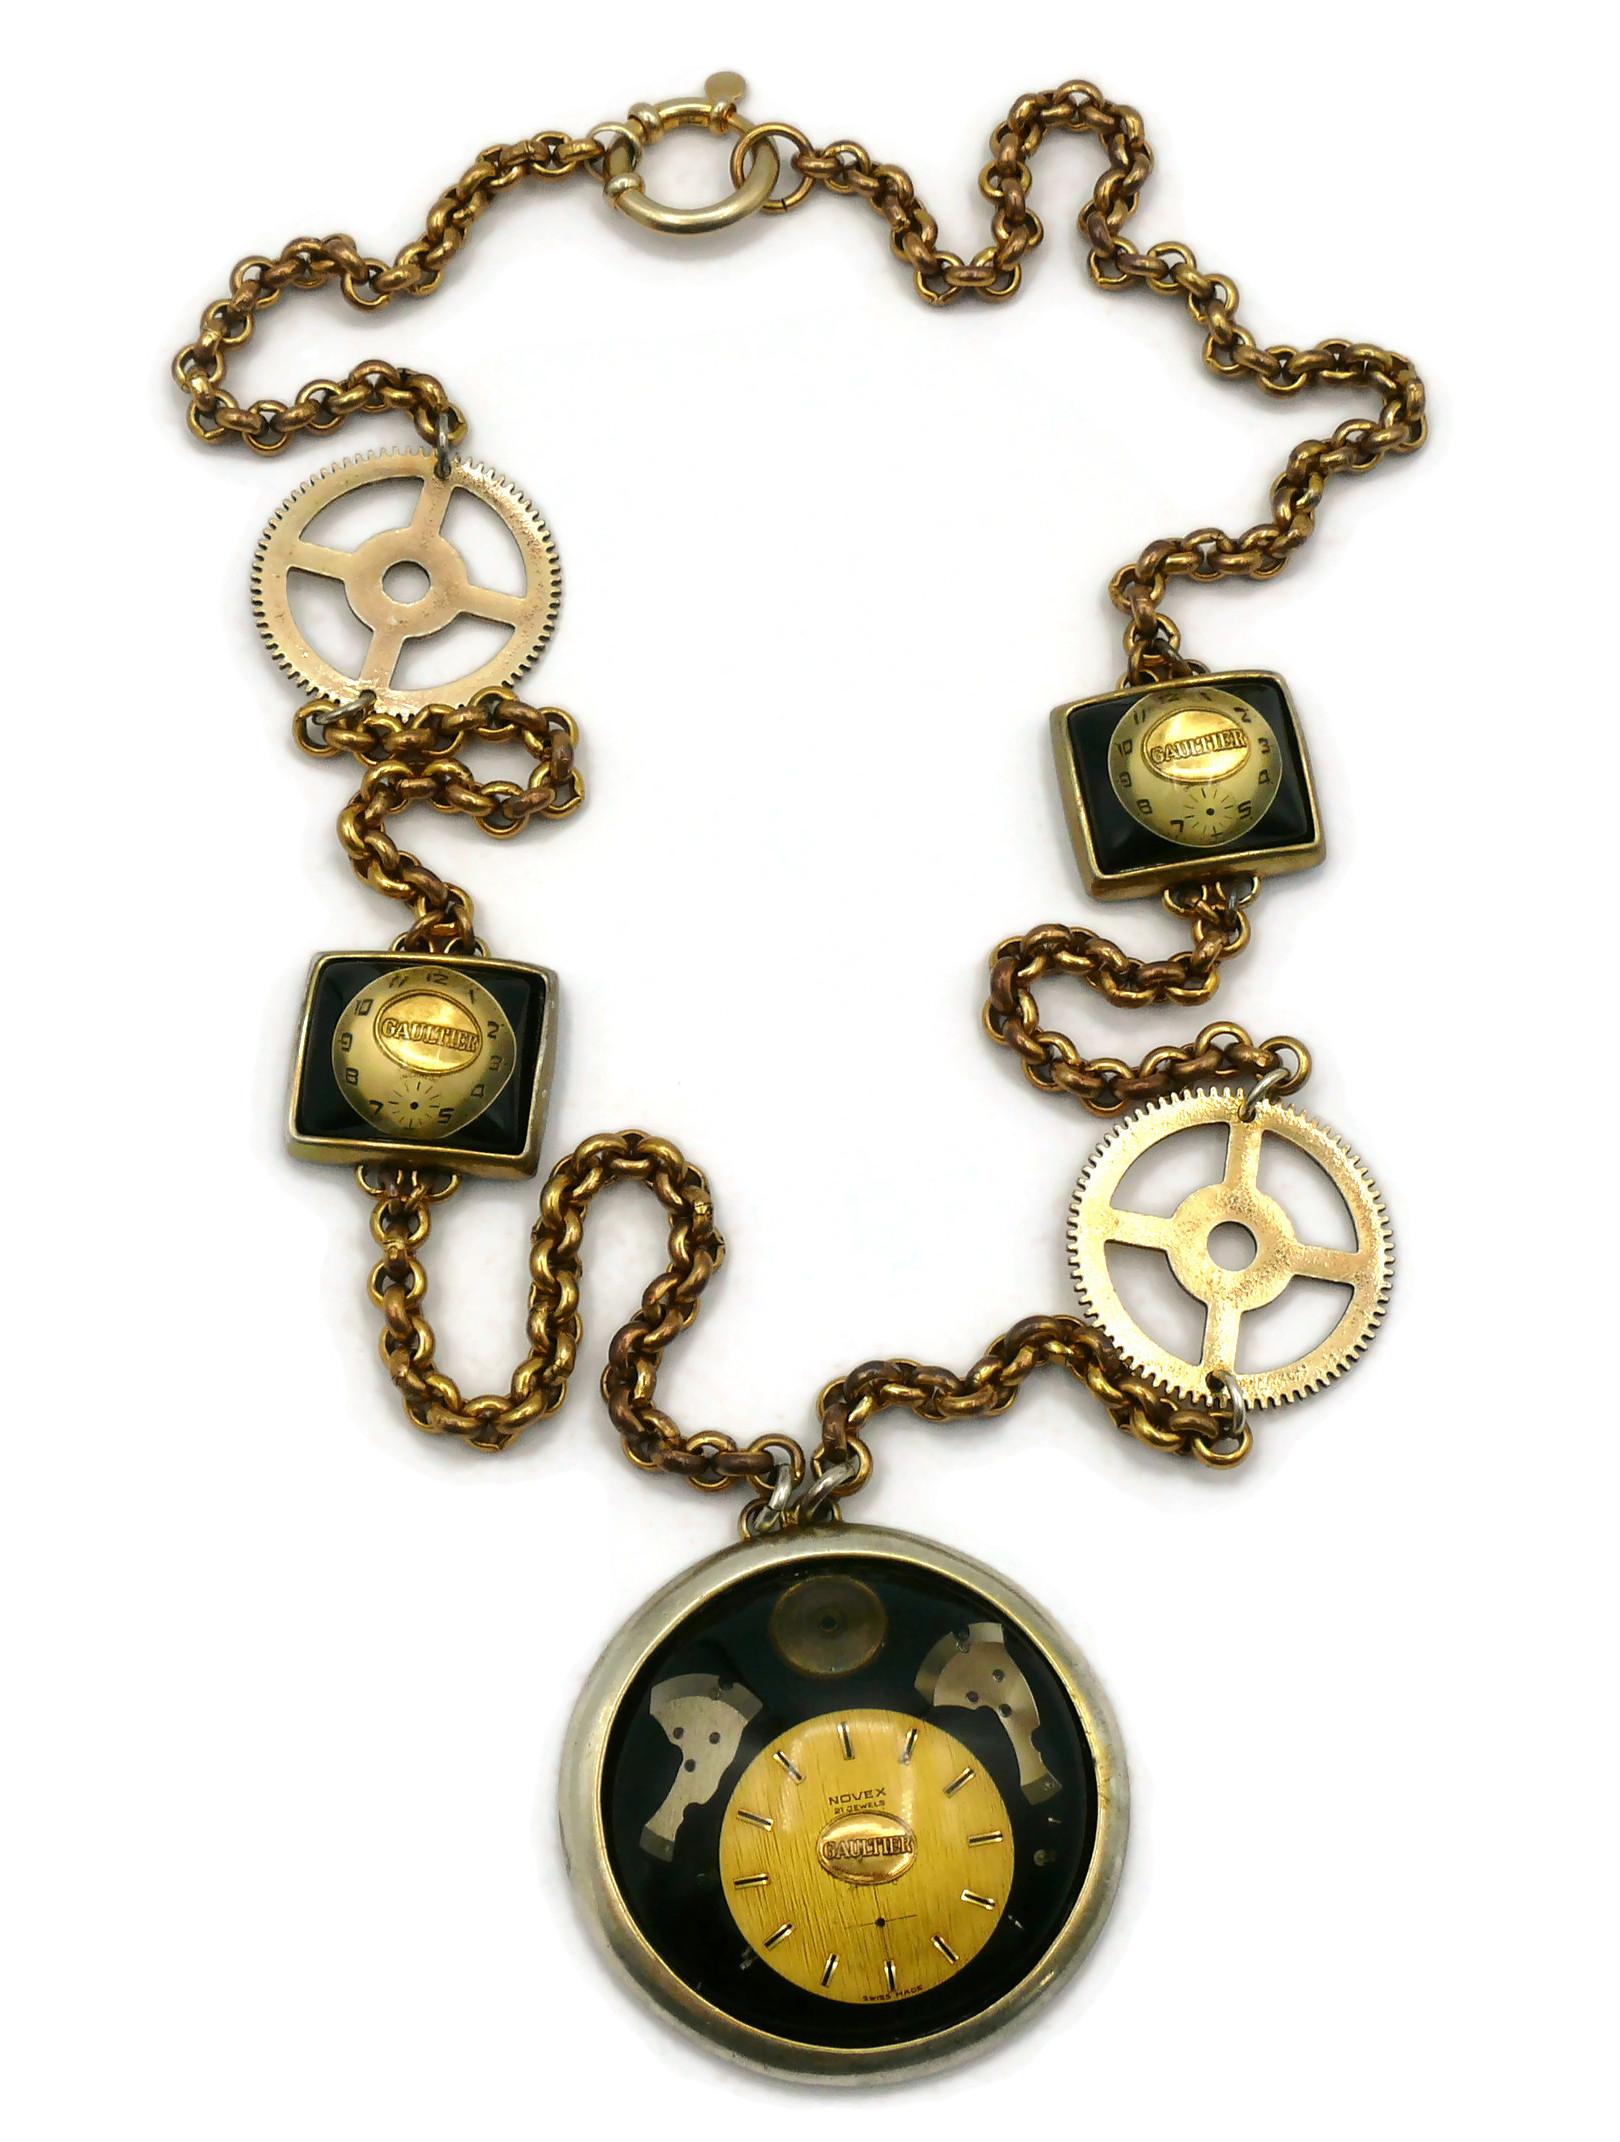 JEAN PAUL GAULTIER Vintage Steampunk Watch Necklace In Fair Condition For Sale In Nice, FR